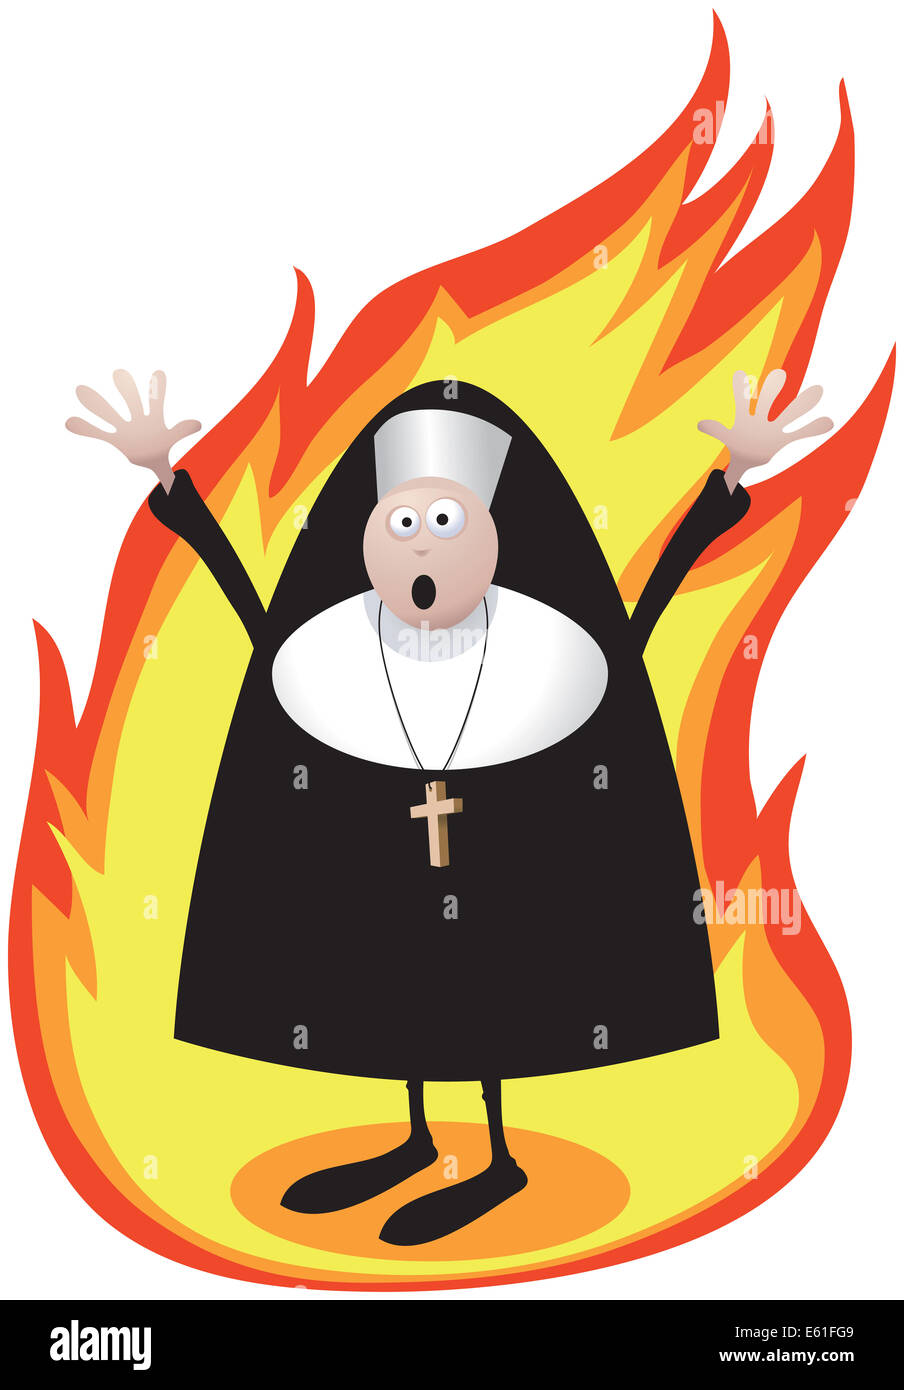 Illustration of a burning screaming nun with her arms waving in the air. Stock Photo